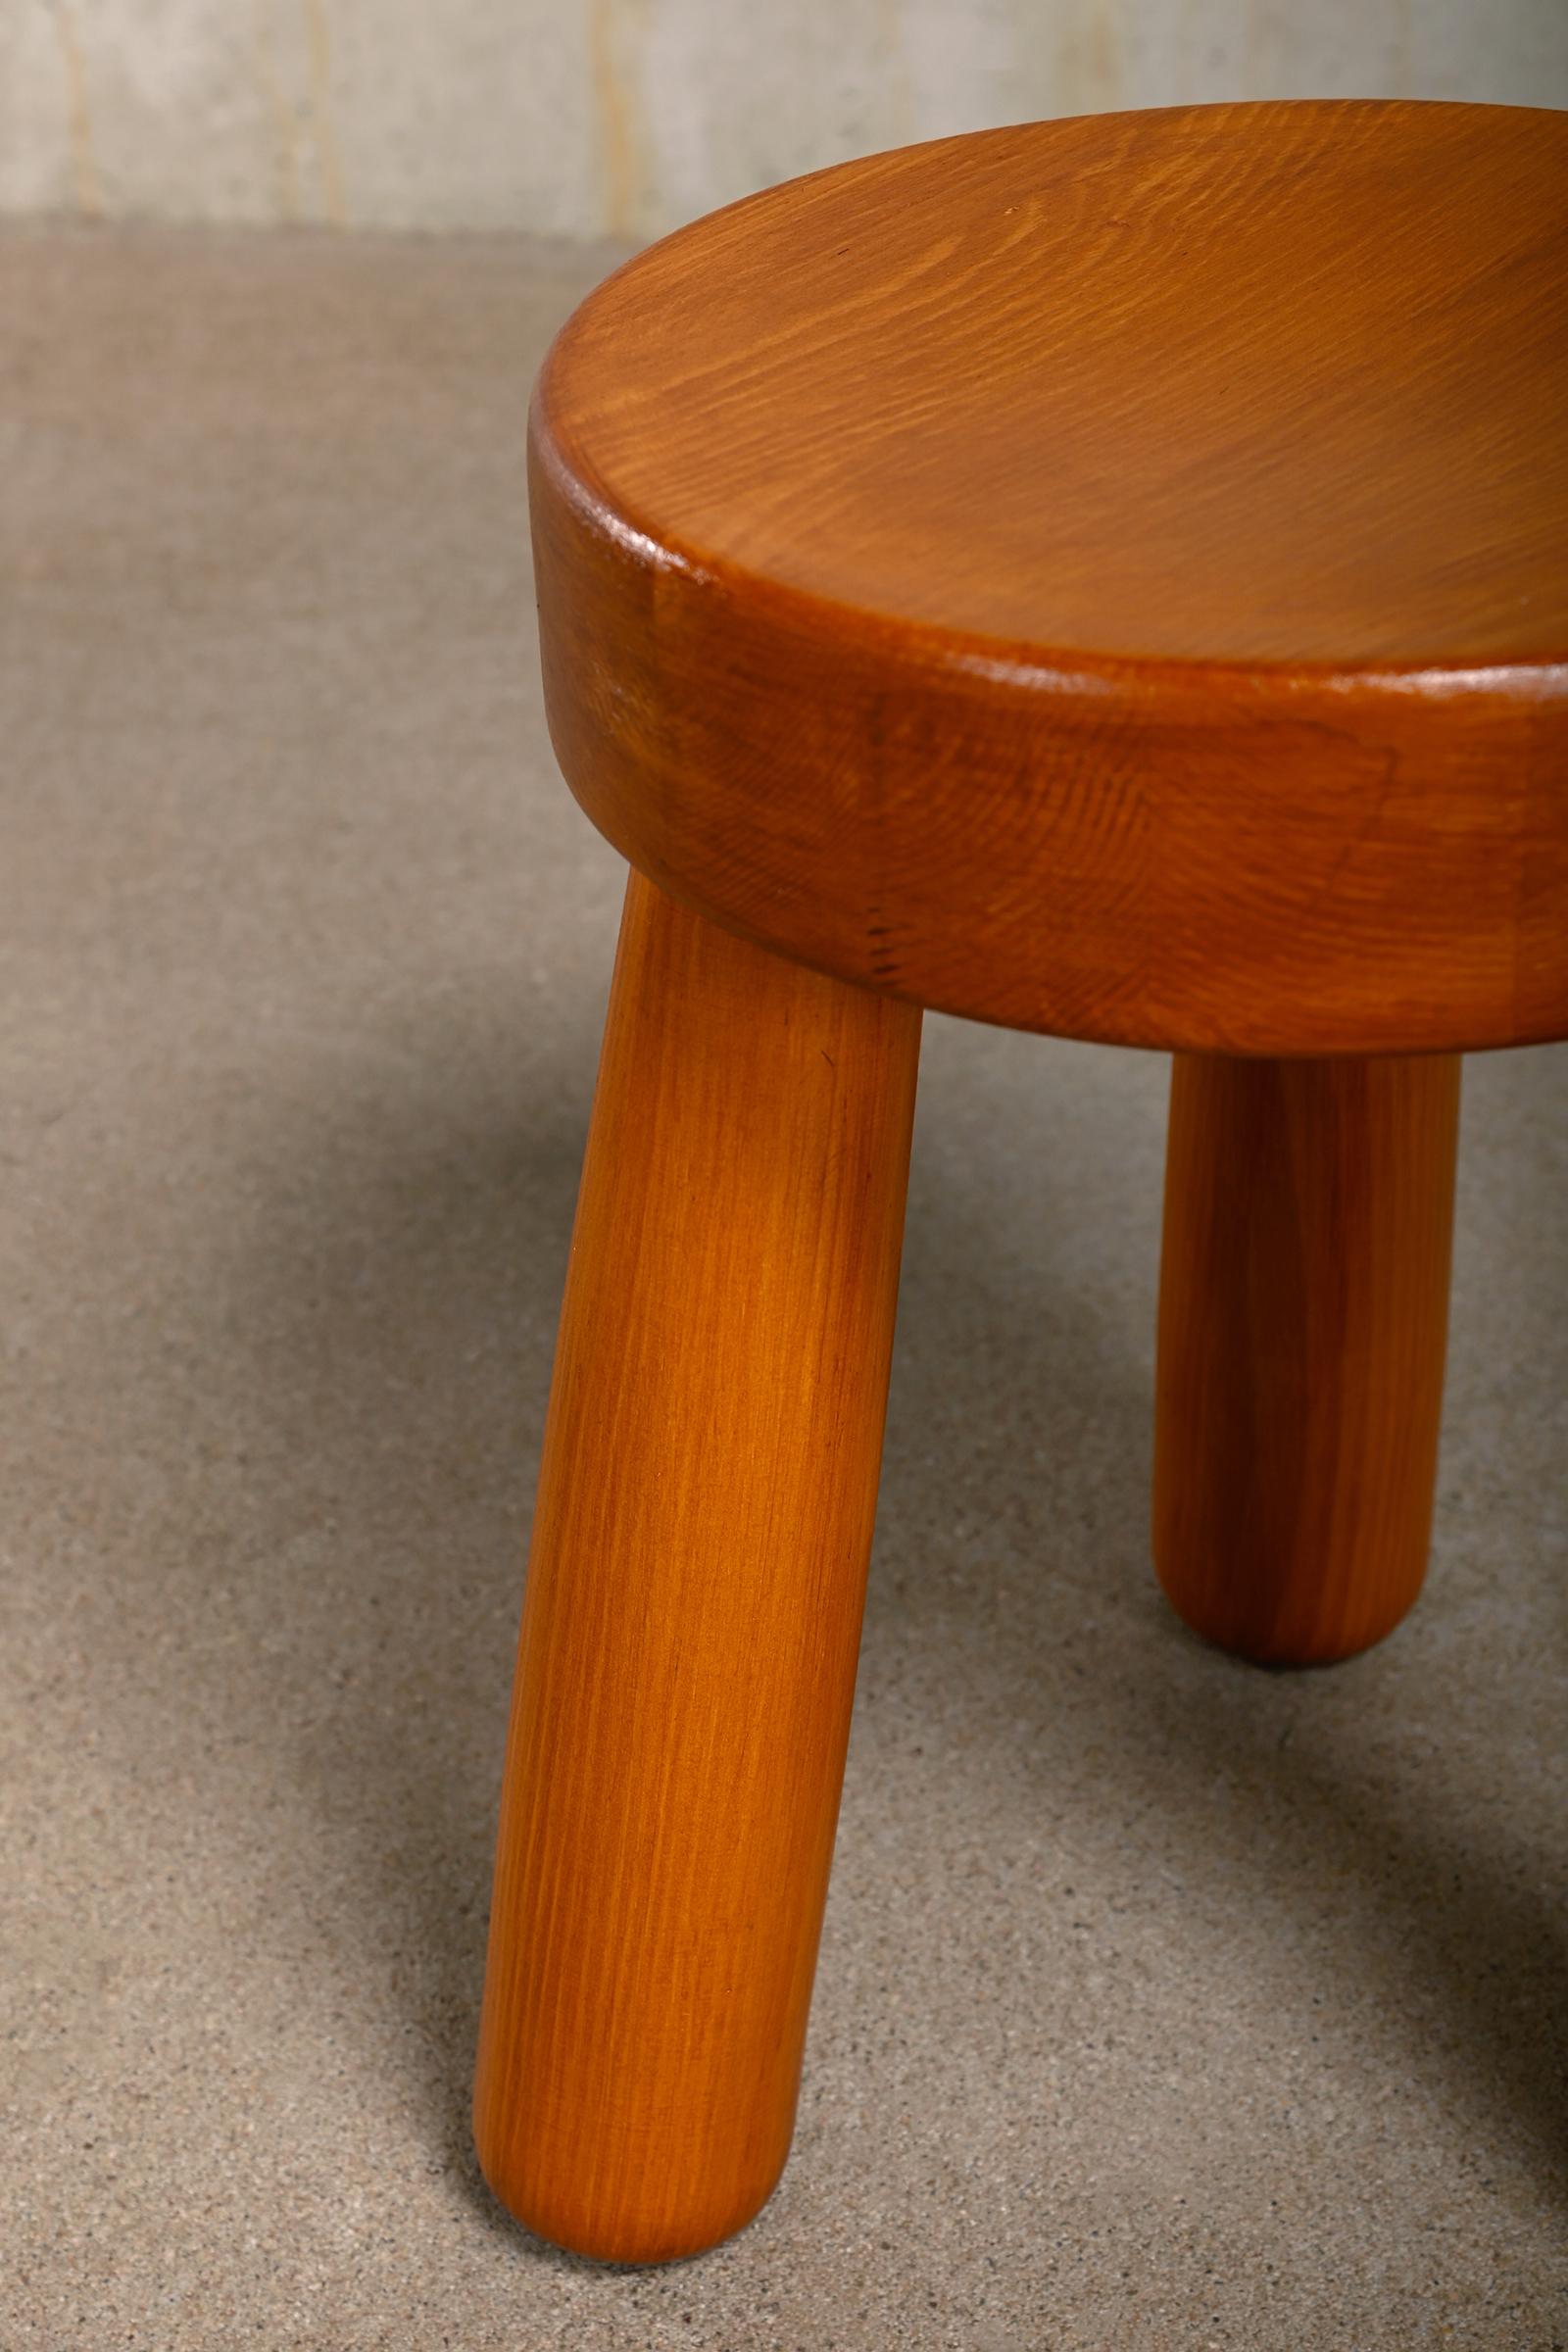 Late 20th Century Tripod Stool in solid Pine wood by Gröning Design Sweden For Sale